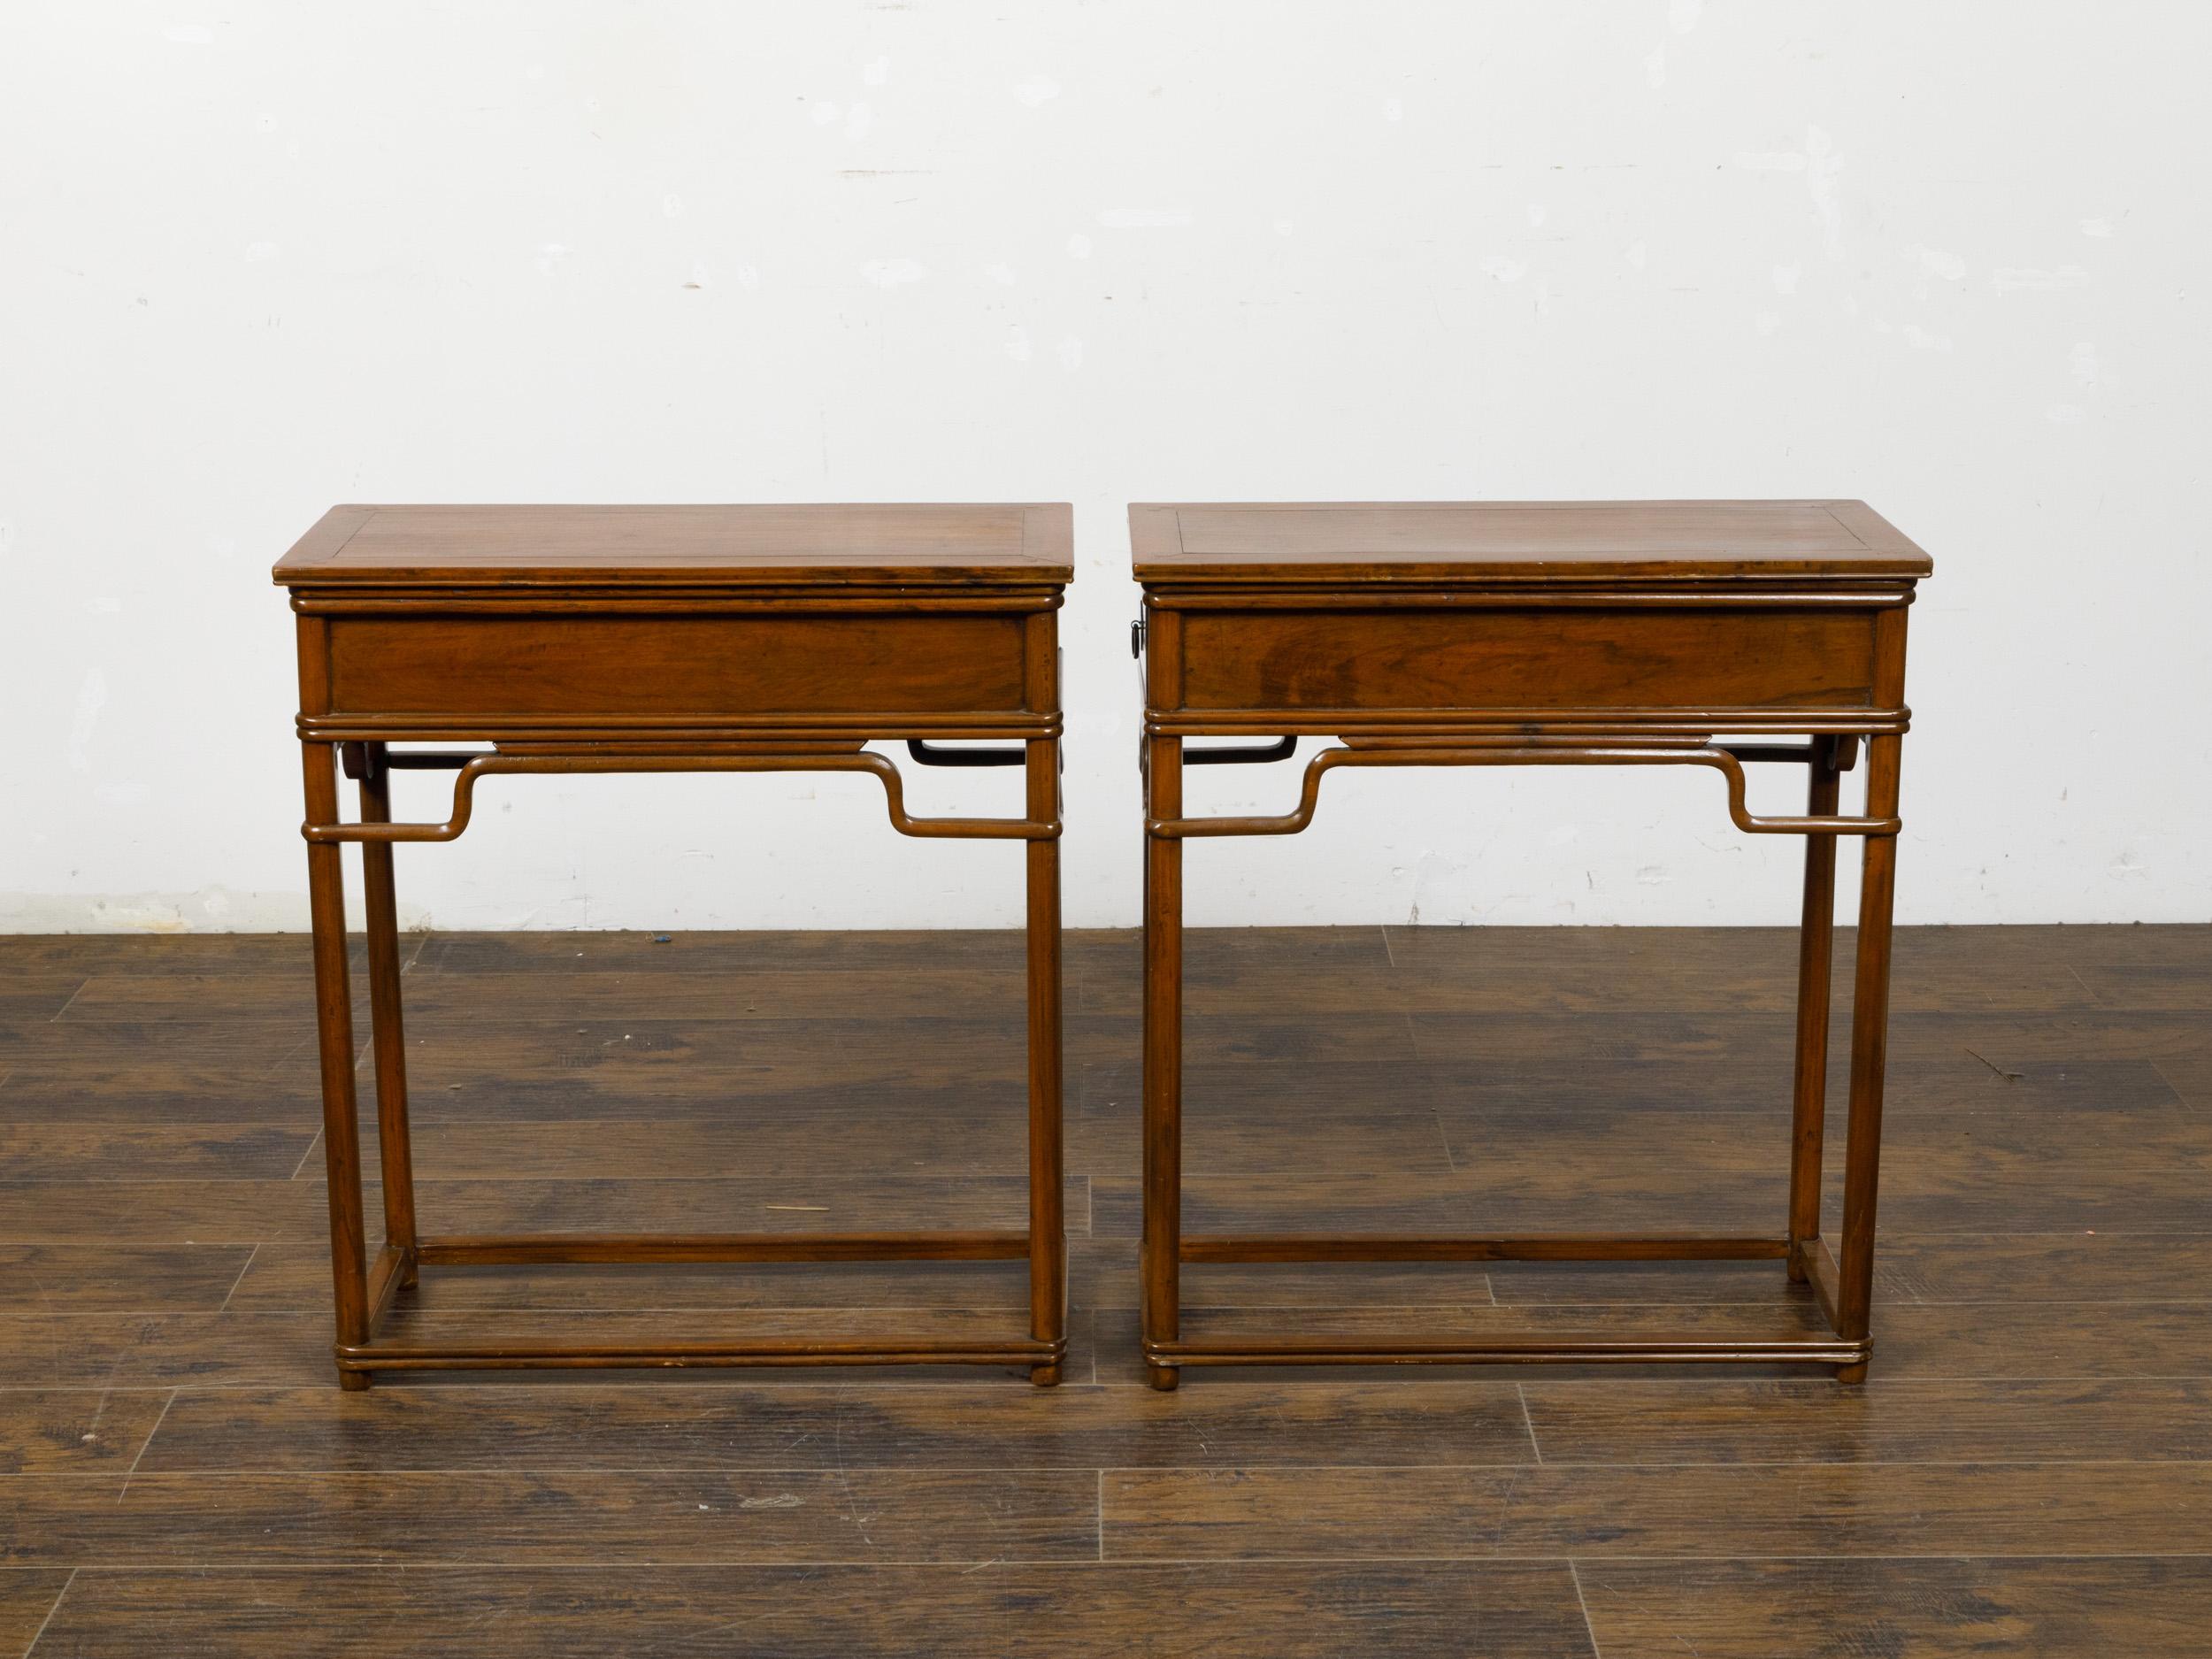 Brass Pair of Teak 19th Century Console Tables with Drawers and Humpback Stretchers For Sale